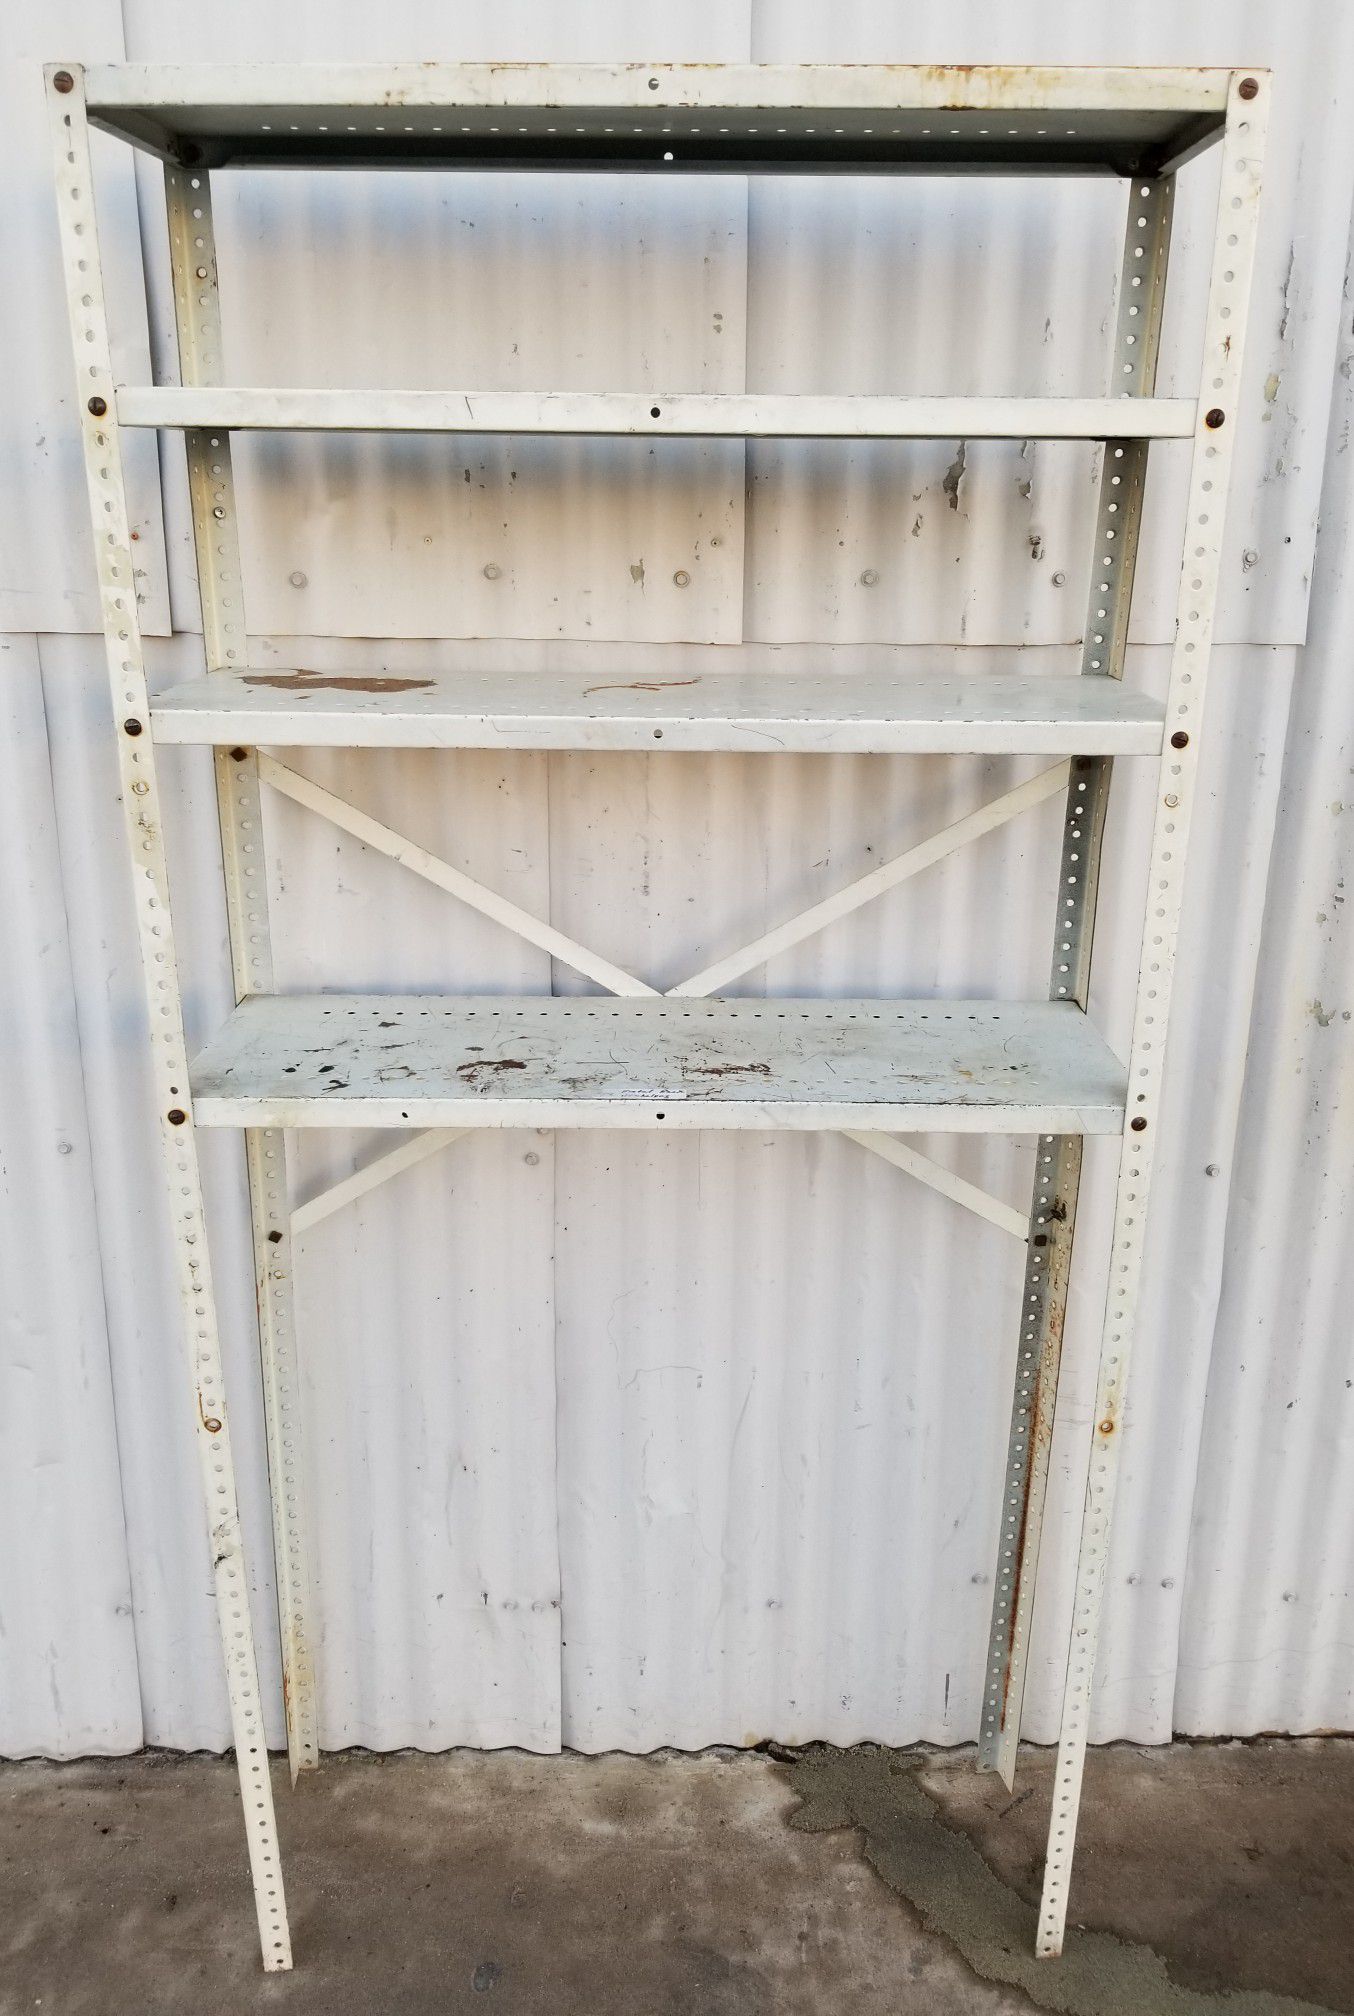 Metal Rack stand with 4 steel shelves for garage shop